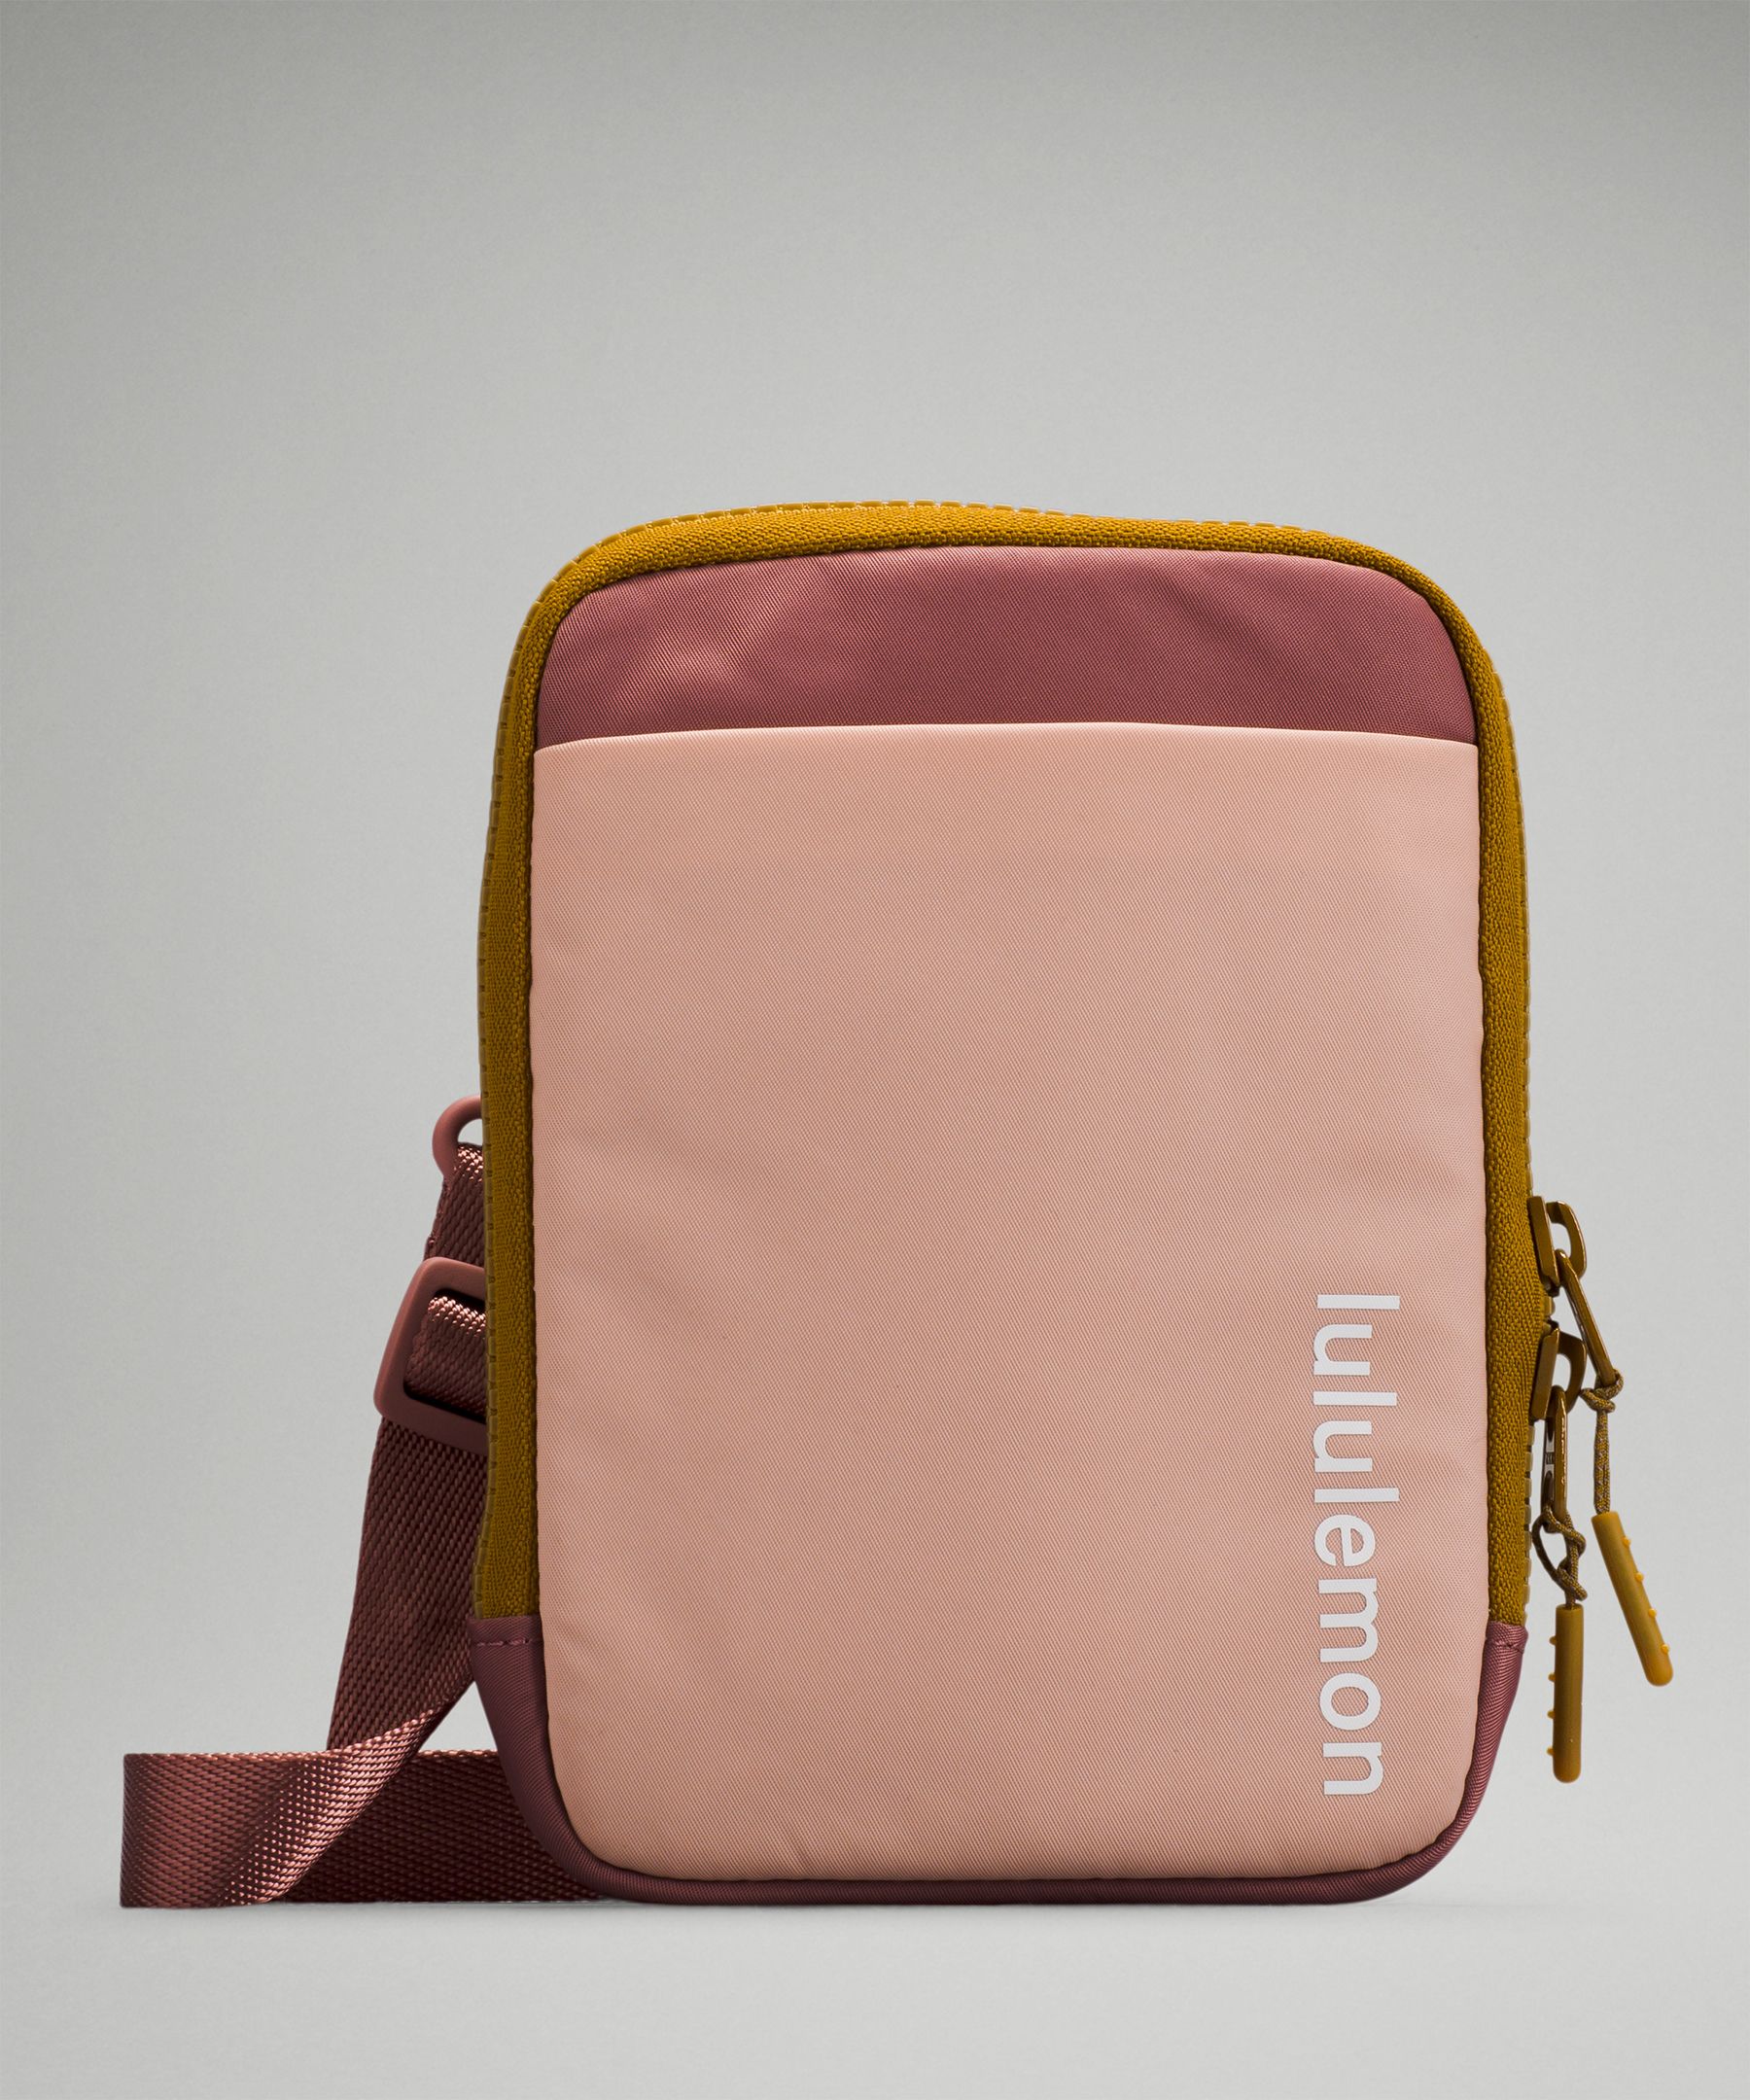 Lululemon Easy Access Crossbody Bag In Precocious Pink/spiced Chai